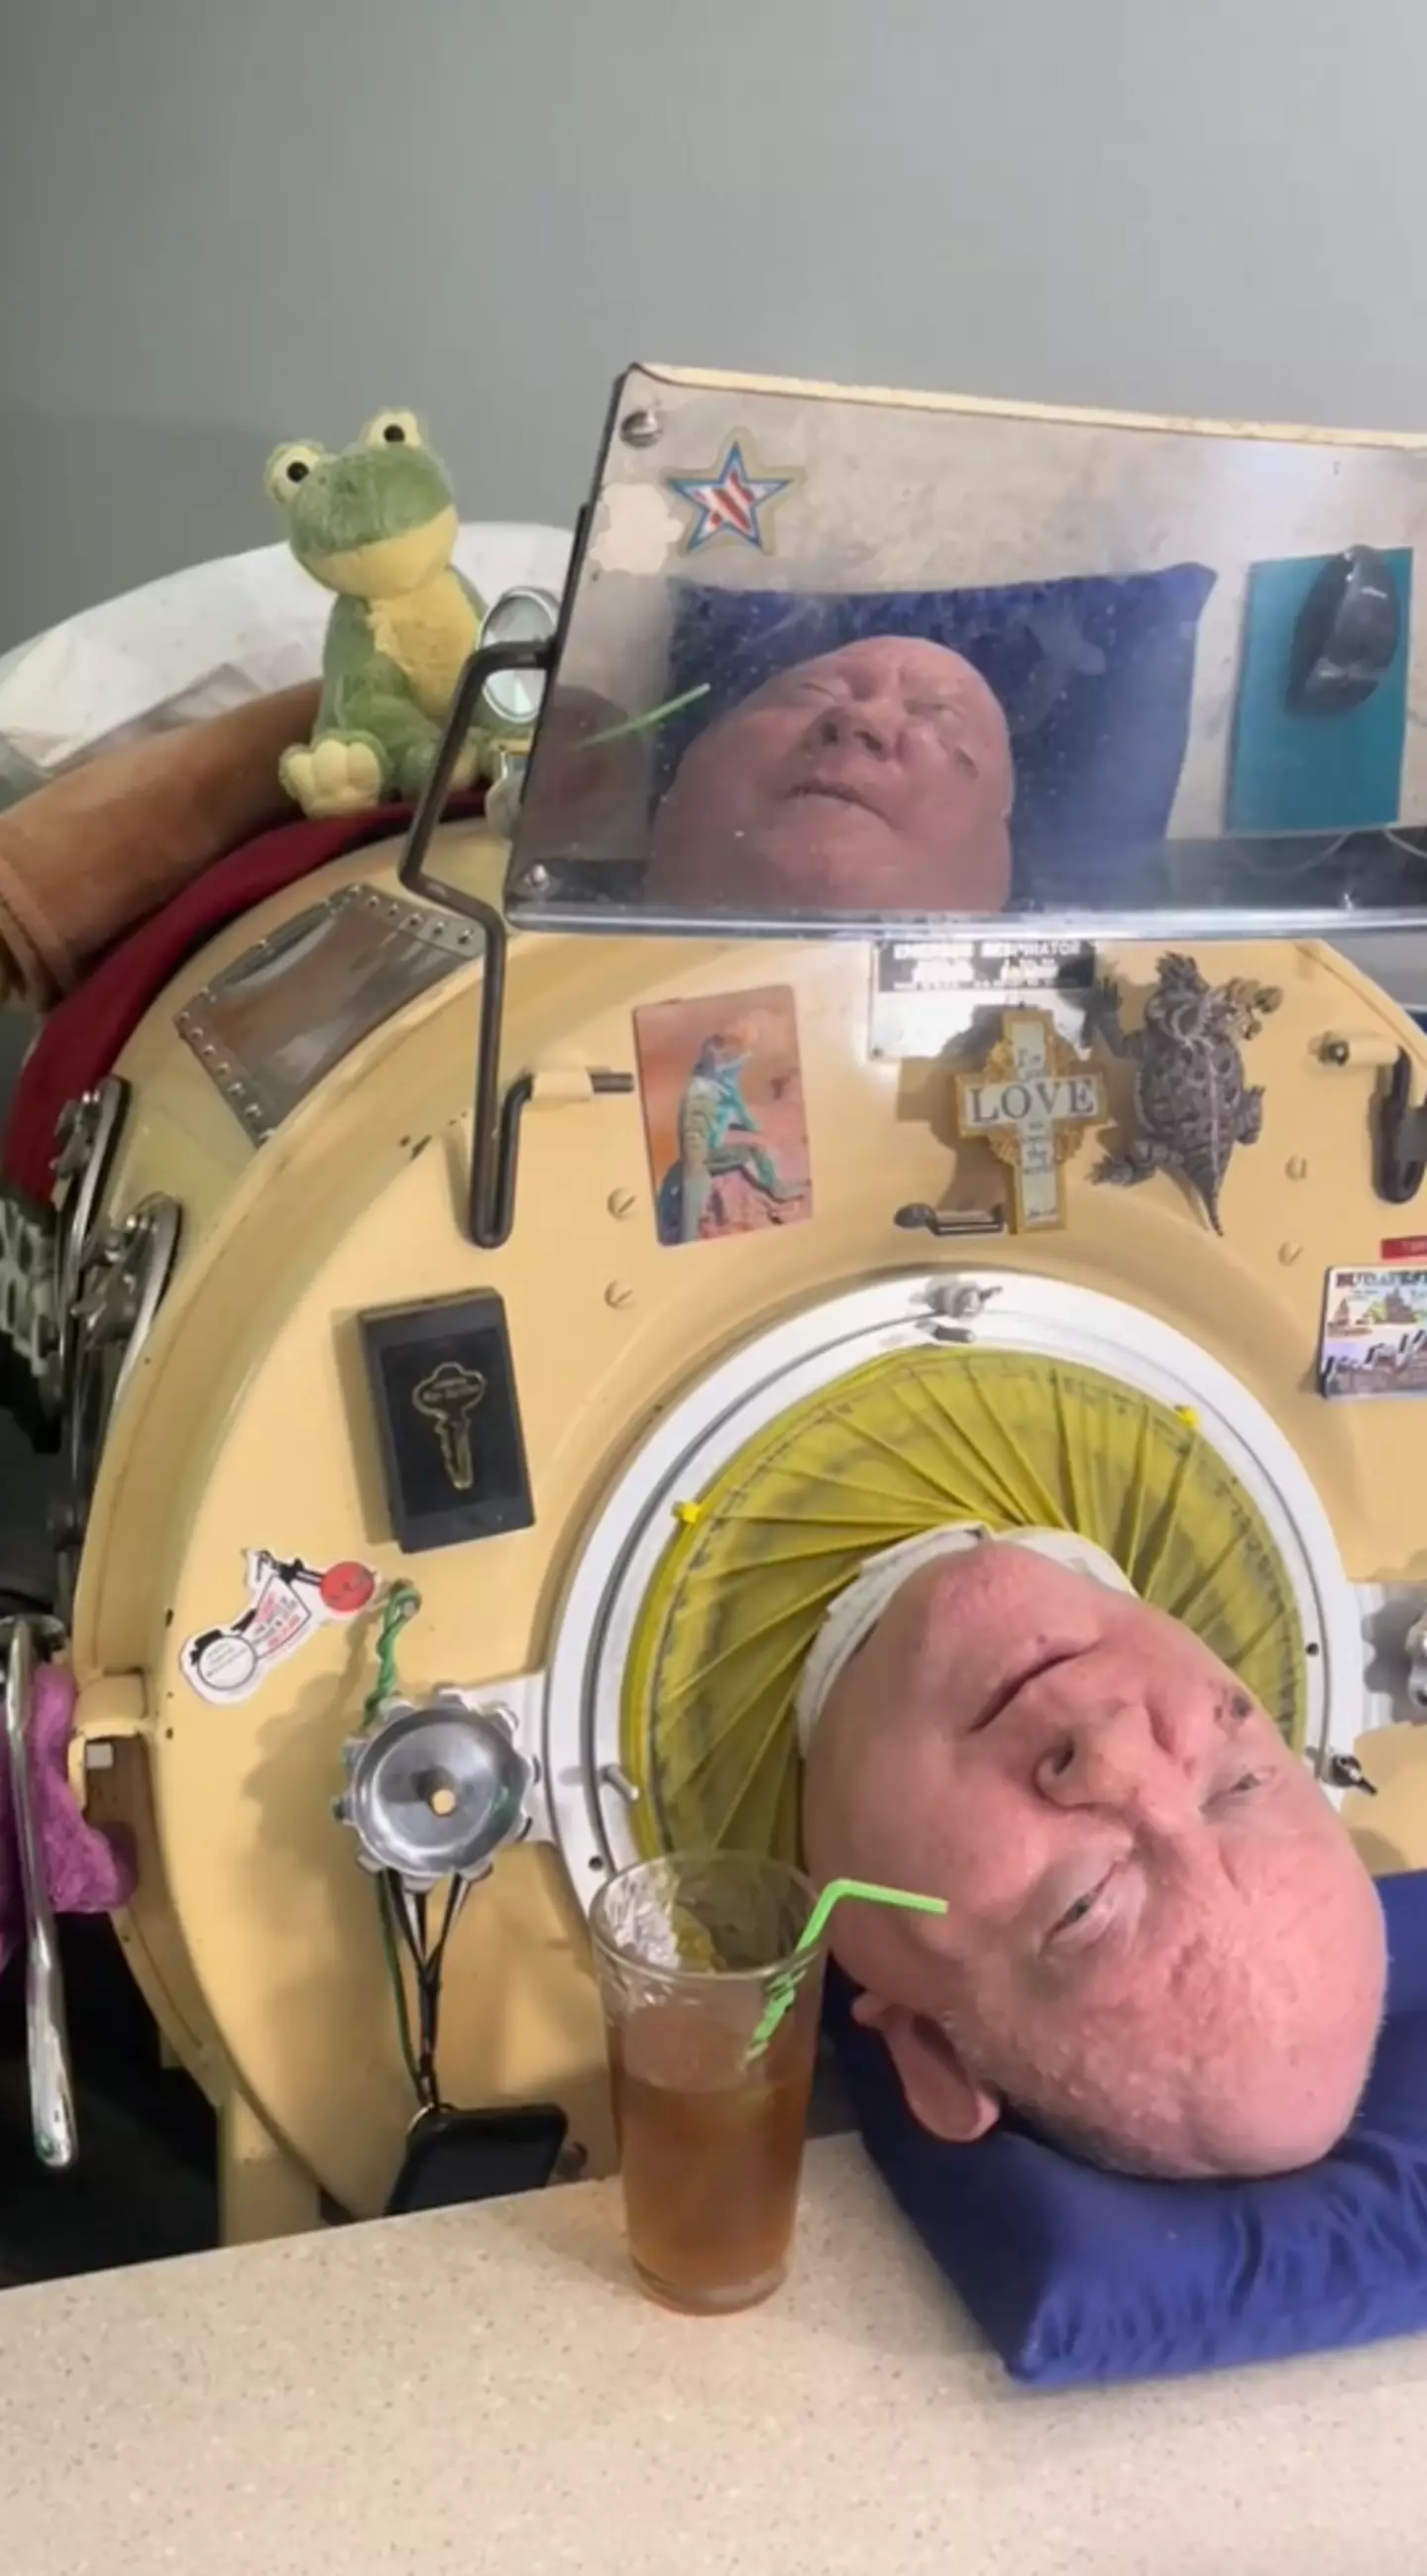 A man who has spent more than 70 years with an iron lung has provided a new update on his life.